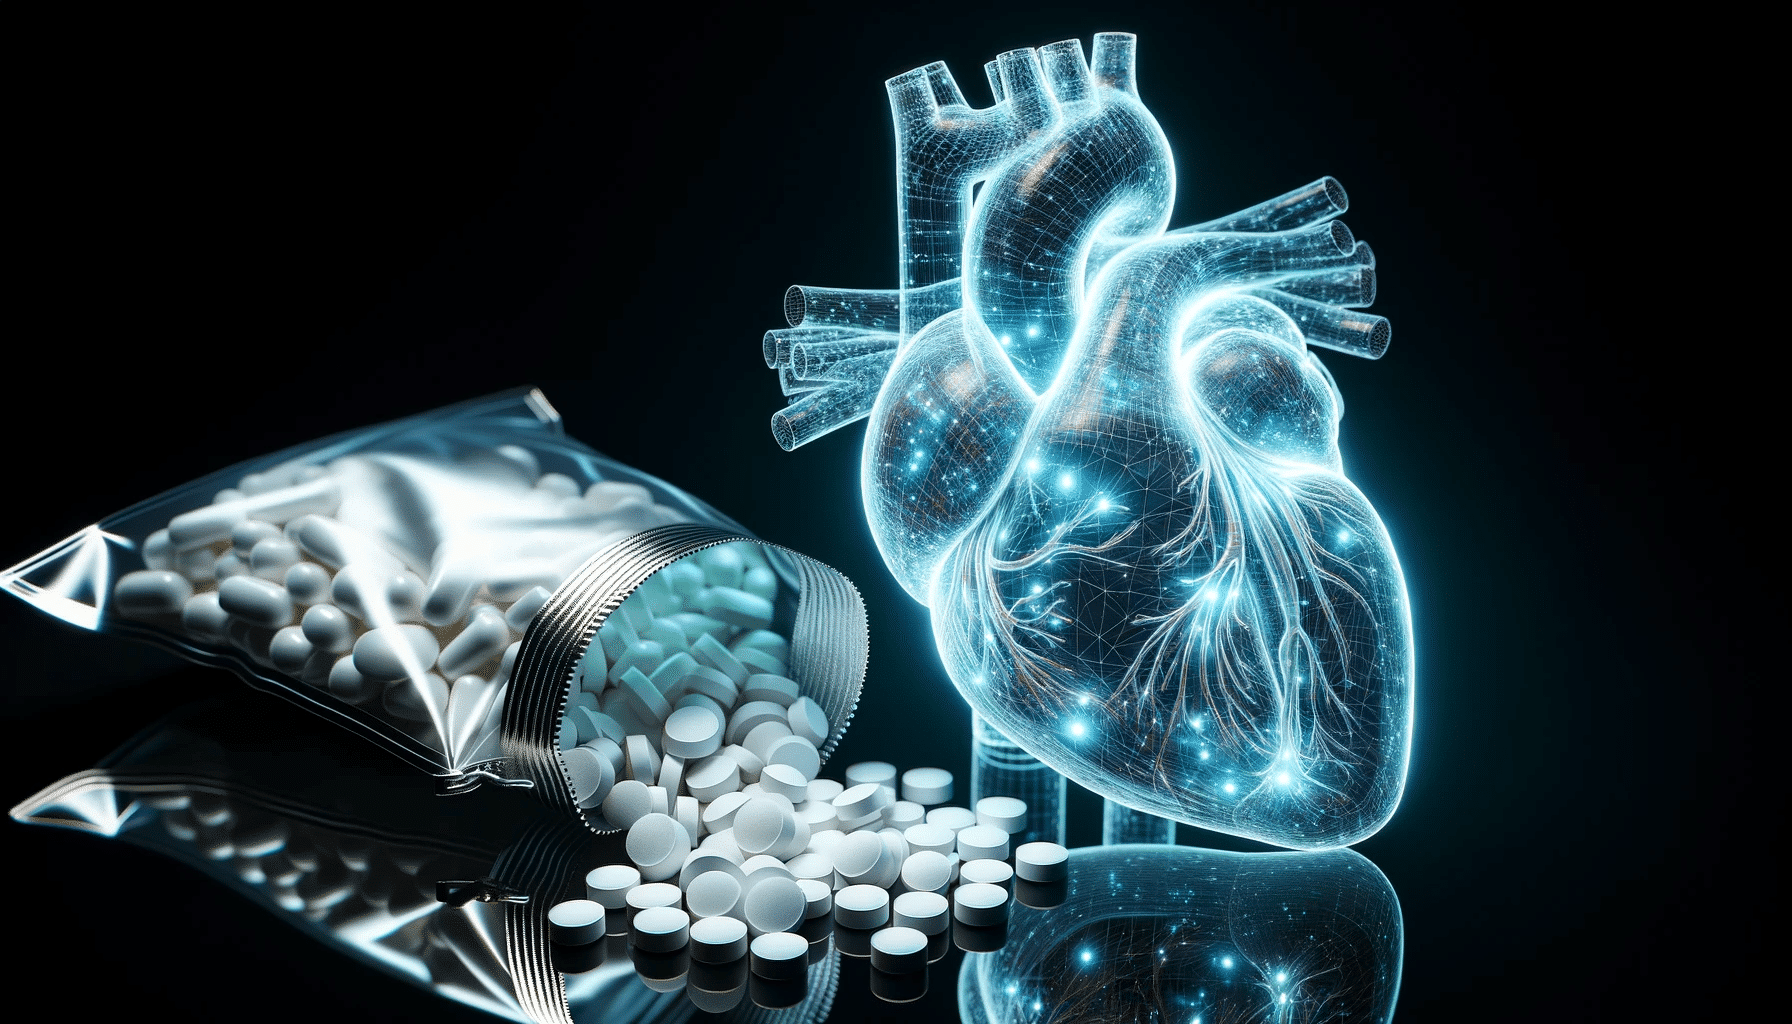 Professional image of a luminous see through heart displaying its complex internal structures. Next to it on a dark reflective surface a pouch of m